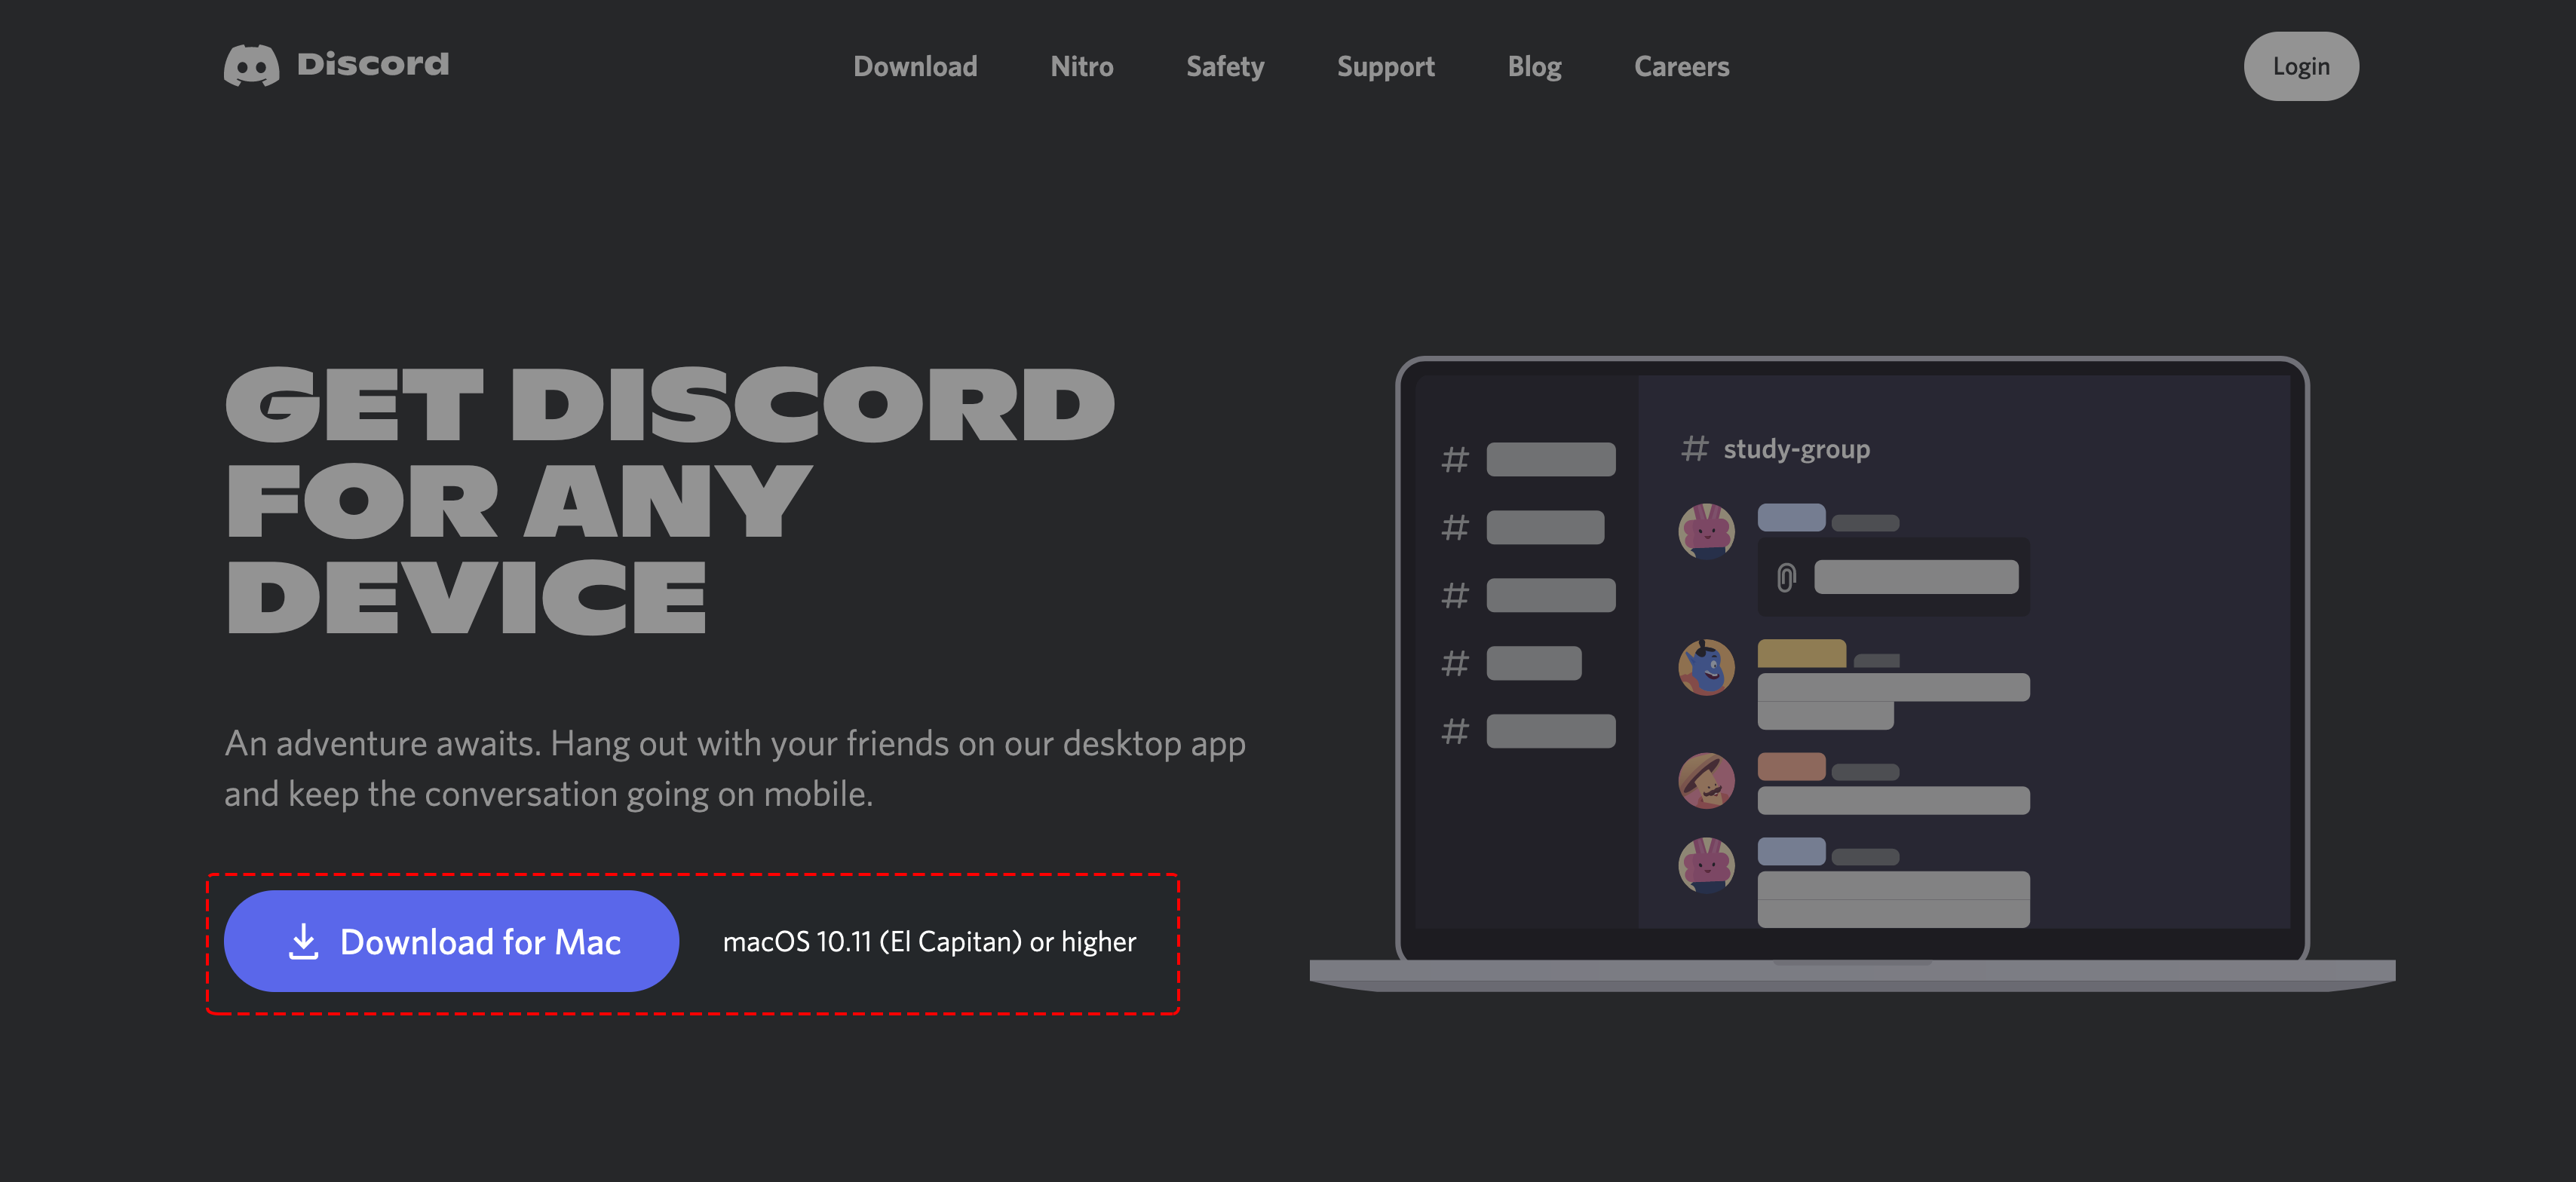 Discord-download-page-for-Mac-devices.png